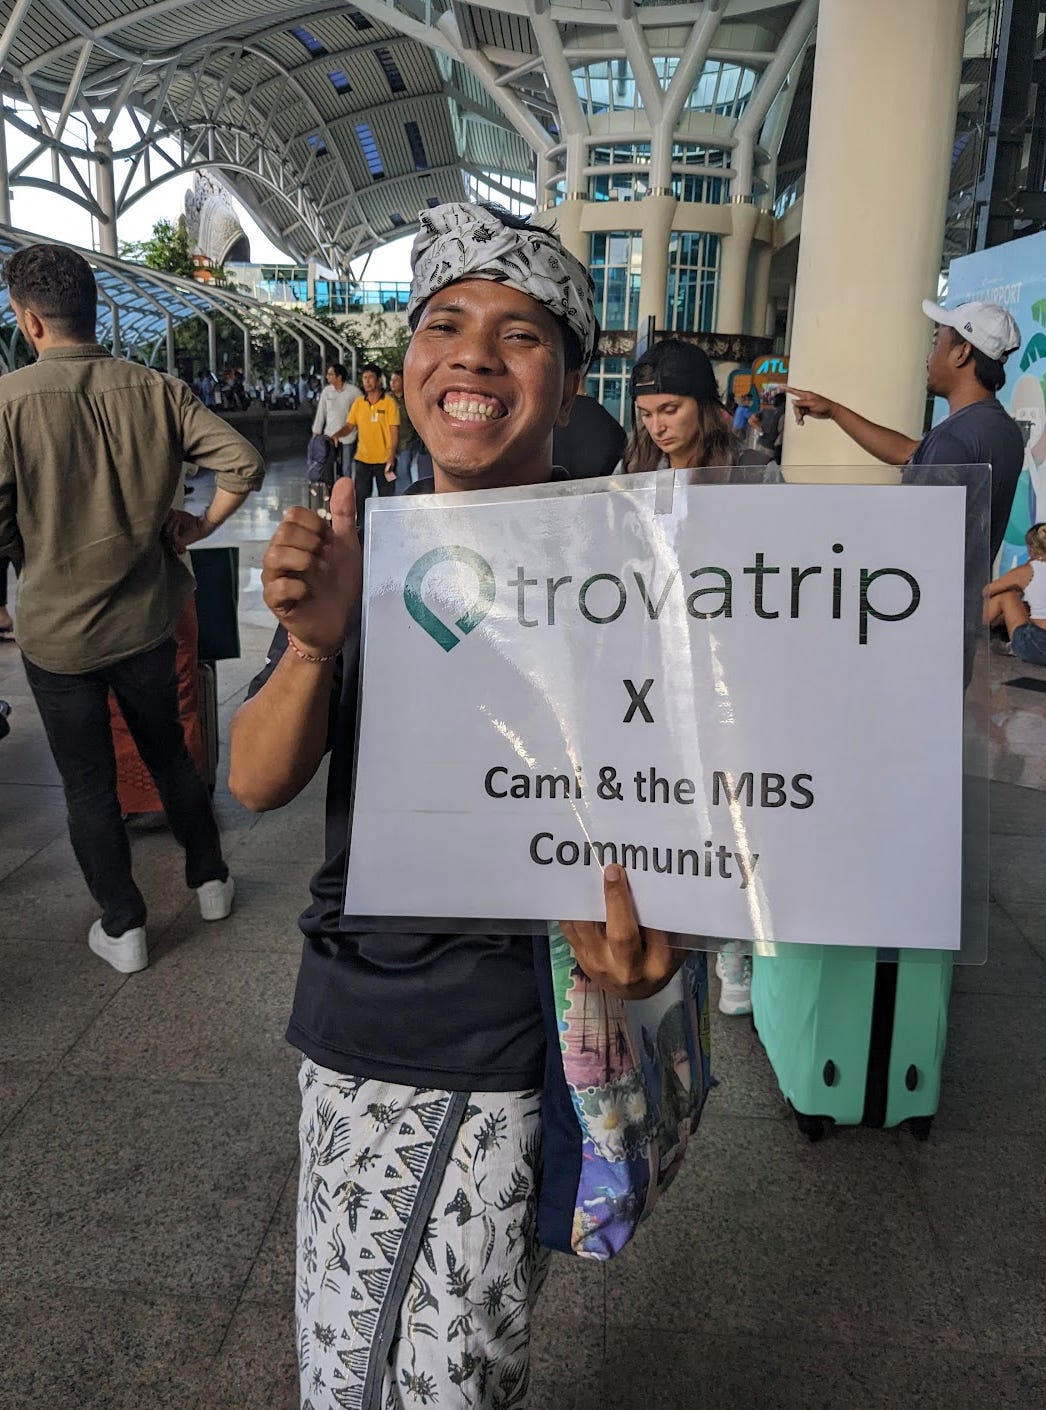 Sana smiles wide enough to show his gums. He wars a white and black headdress, black shirt and white and black sarong. He holds up a sign that reads, "trovatrip x Cami & the MBS Community"